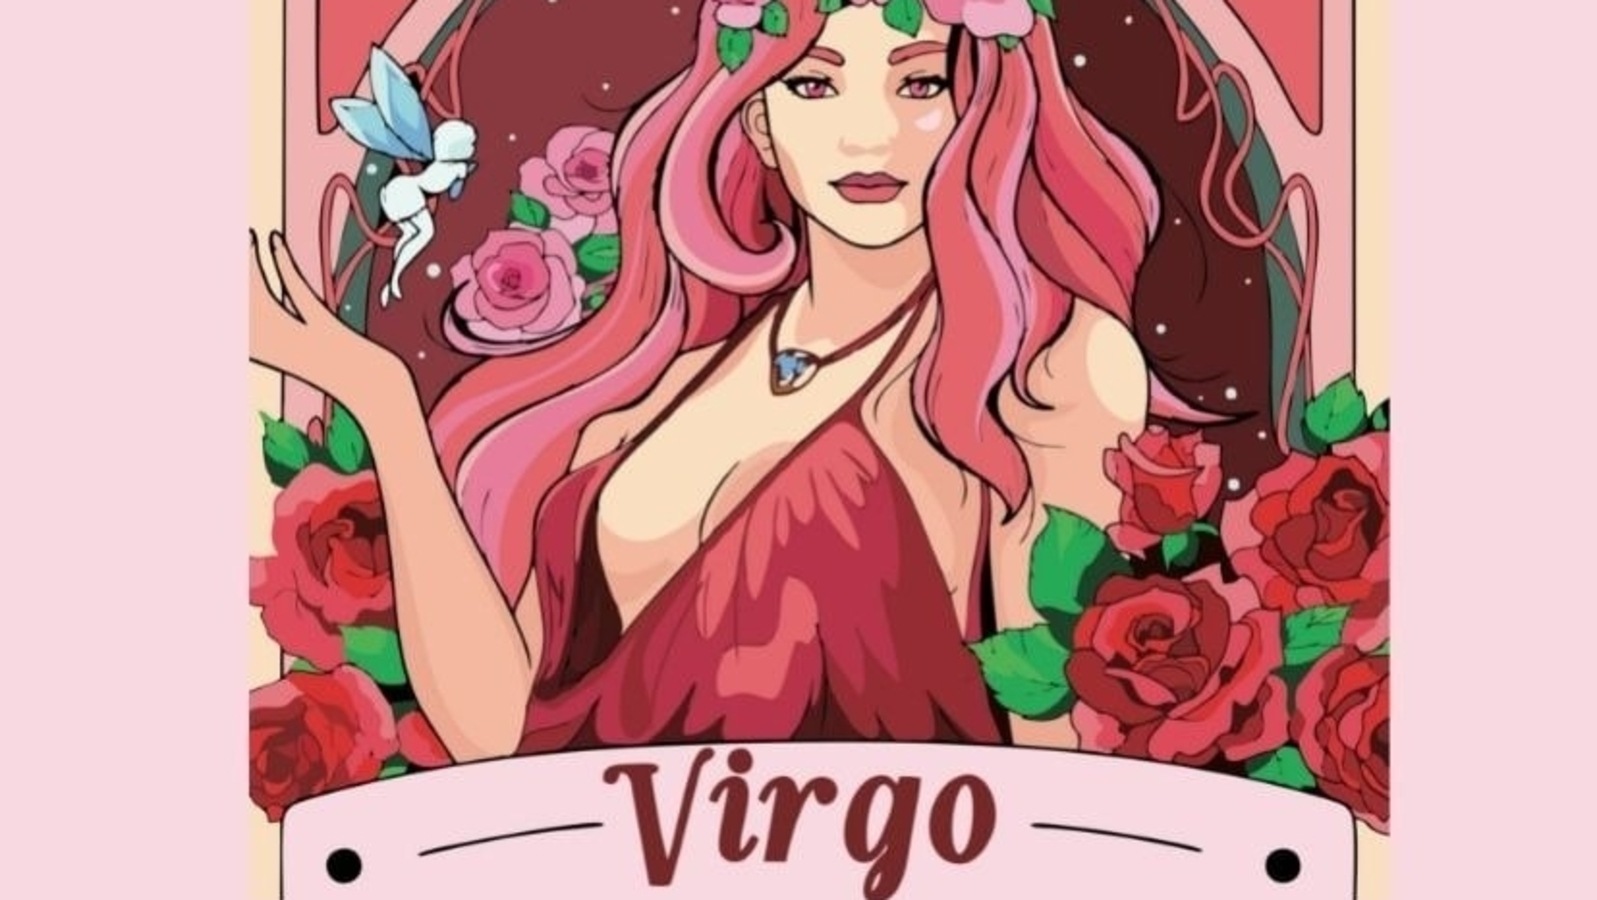 Virgo Horoscope Today Daily Predictions for June 12, '22 states, to